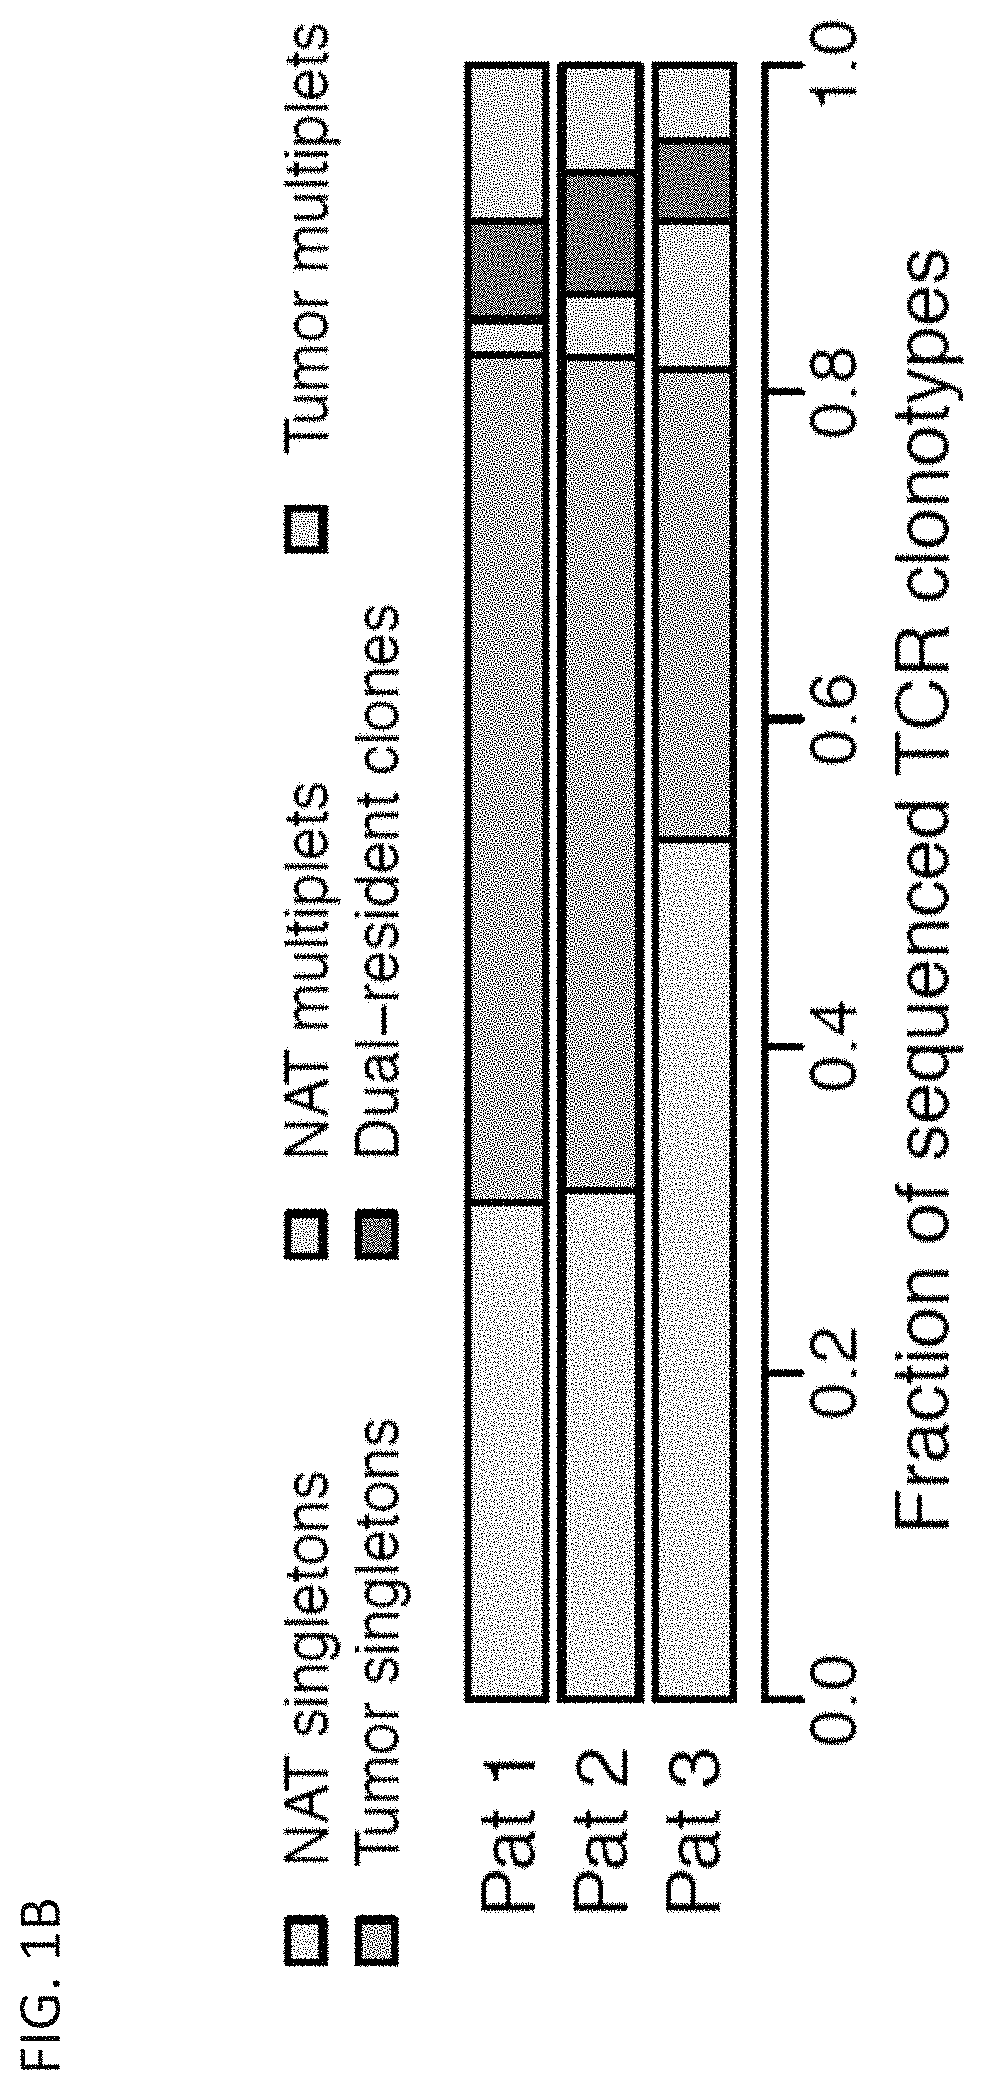 Diagnostic methods and compositions for cancer immunotherapy